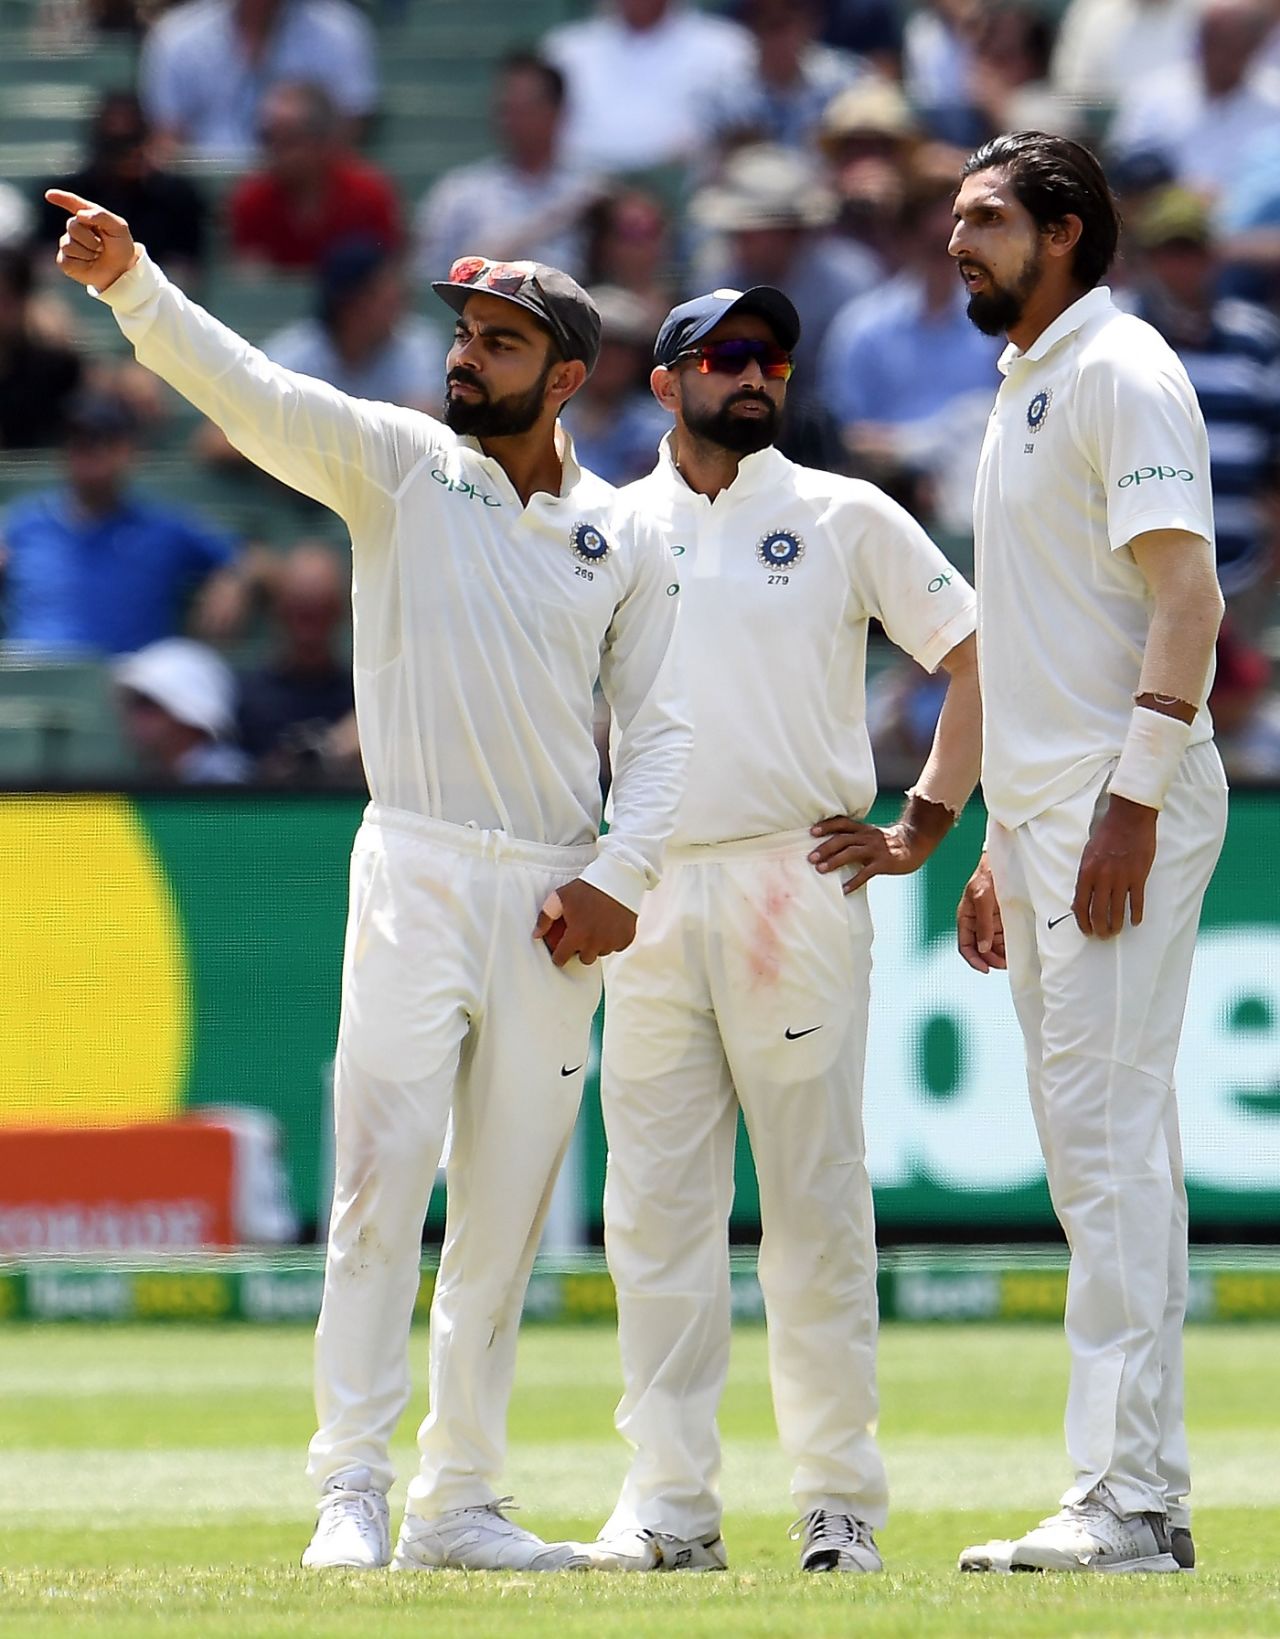 Virat Kohli discusses field placements with Ishant Sharma and Mohammed Shami, Melbourne, December 30, 2018